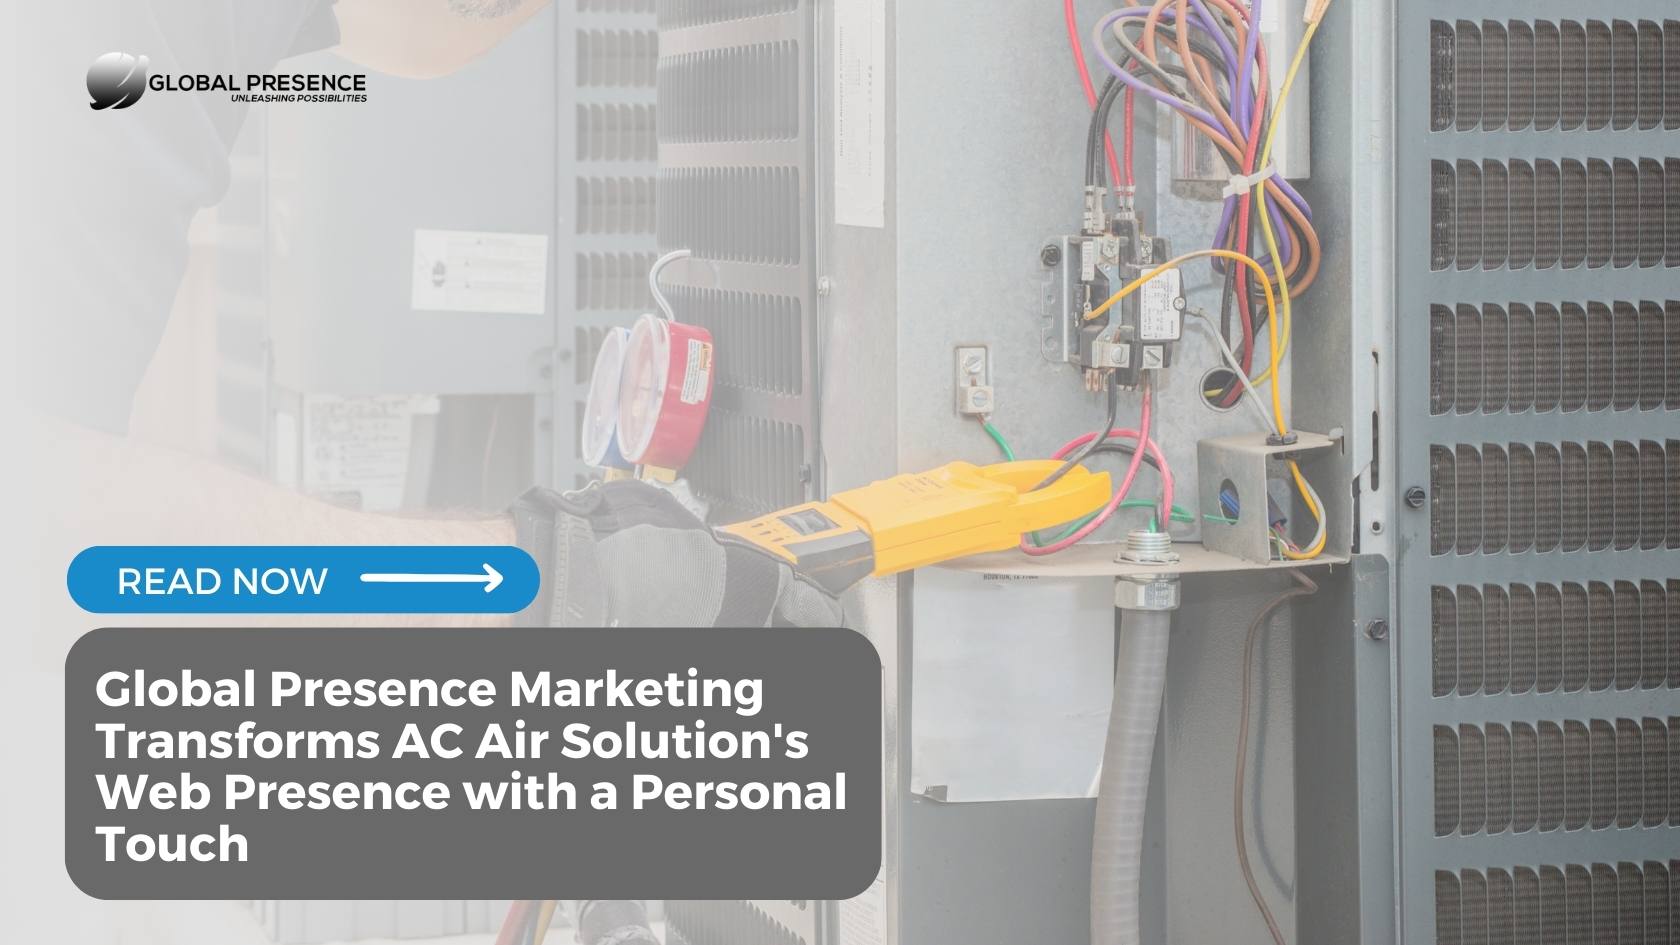 Global Presence Marketing Transforms AC Air Solution's Web Presence with a Personal Touch